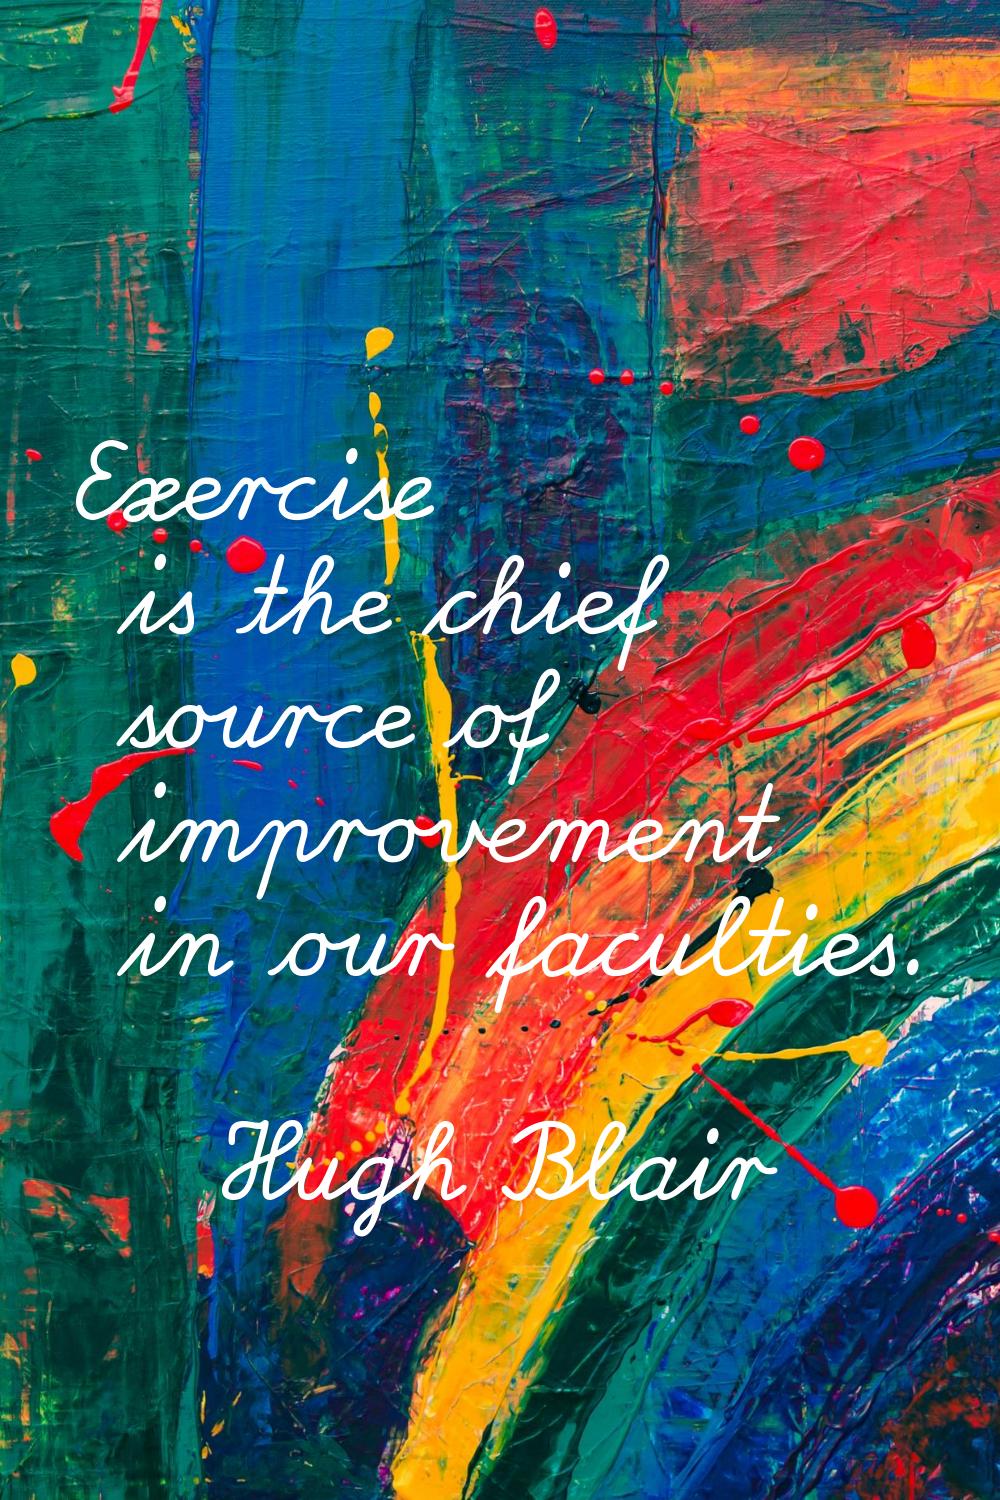 Exercise is the chief source of improvement in our faculties.